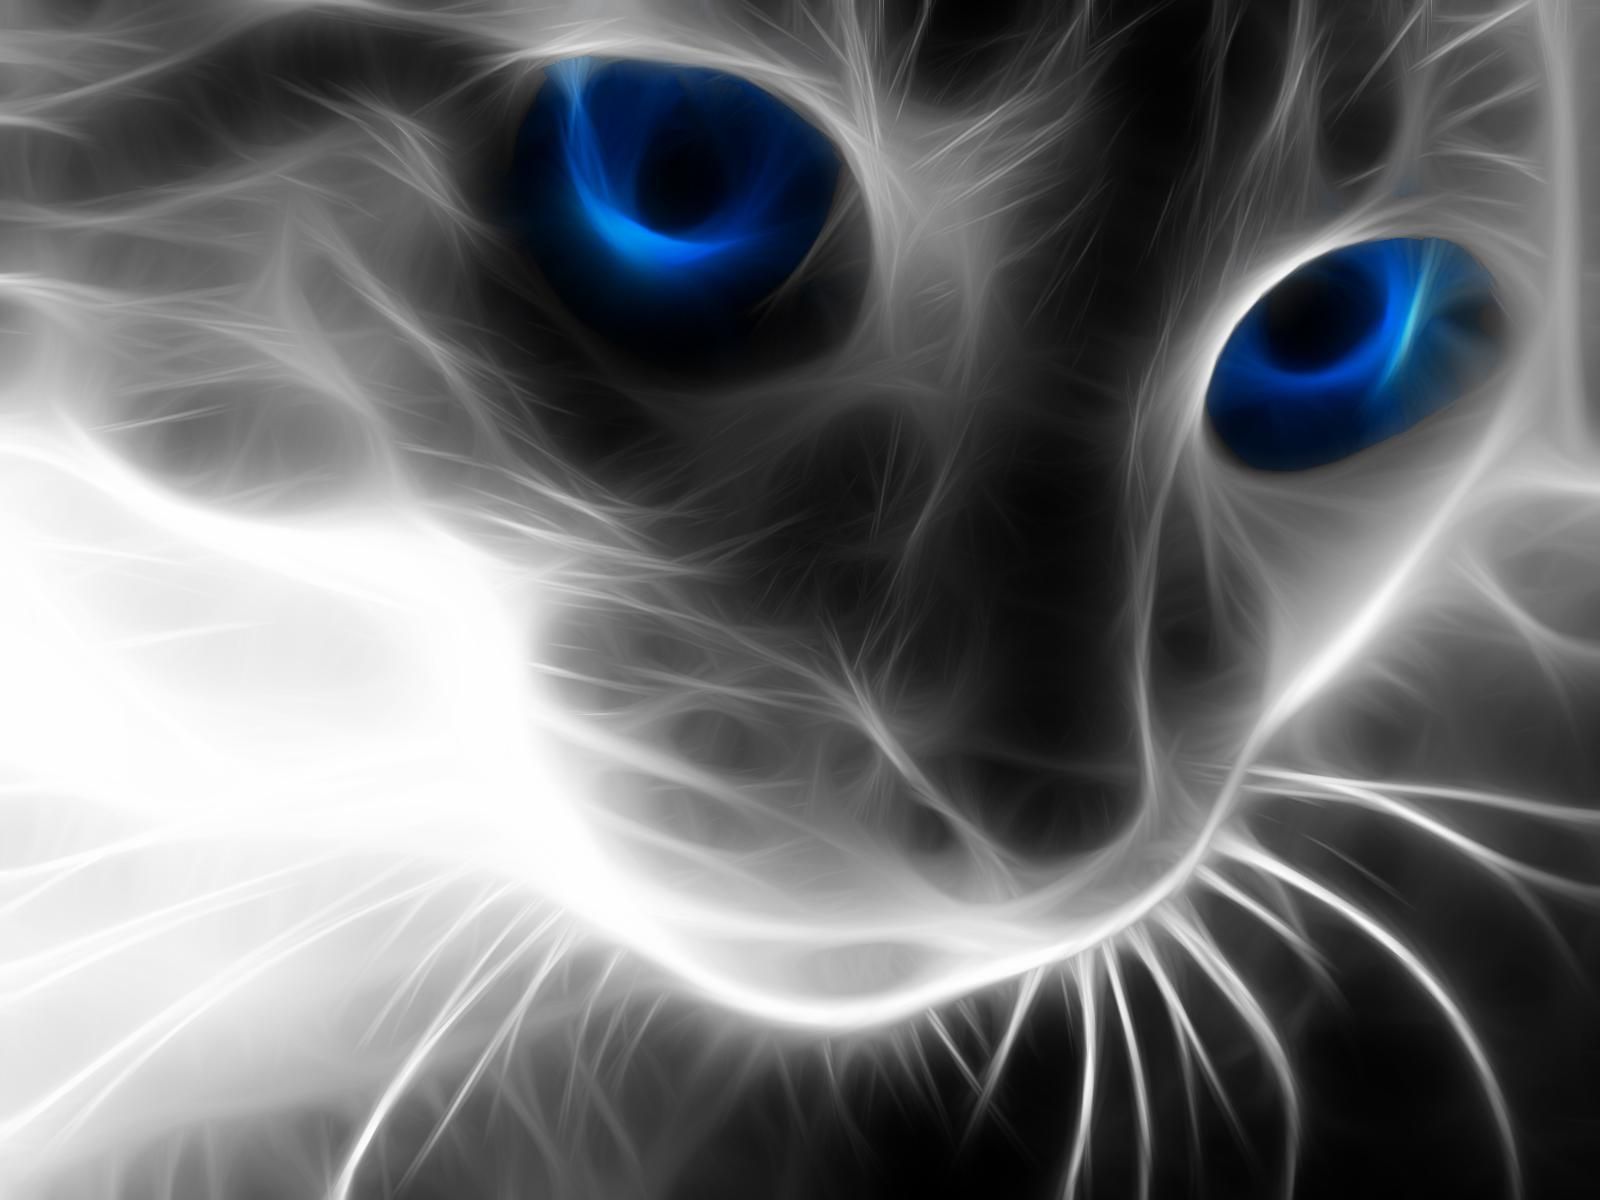 Cat and light. Cat with blue eyes, Cat wallpaper, Wild cats